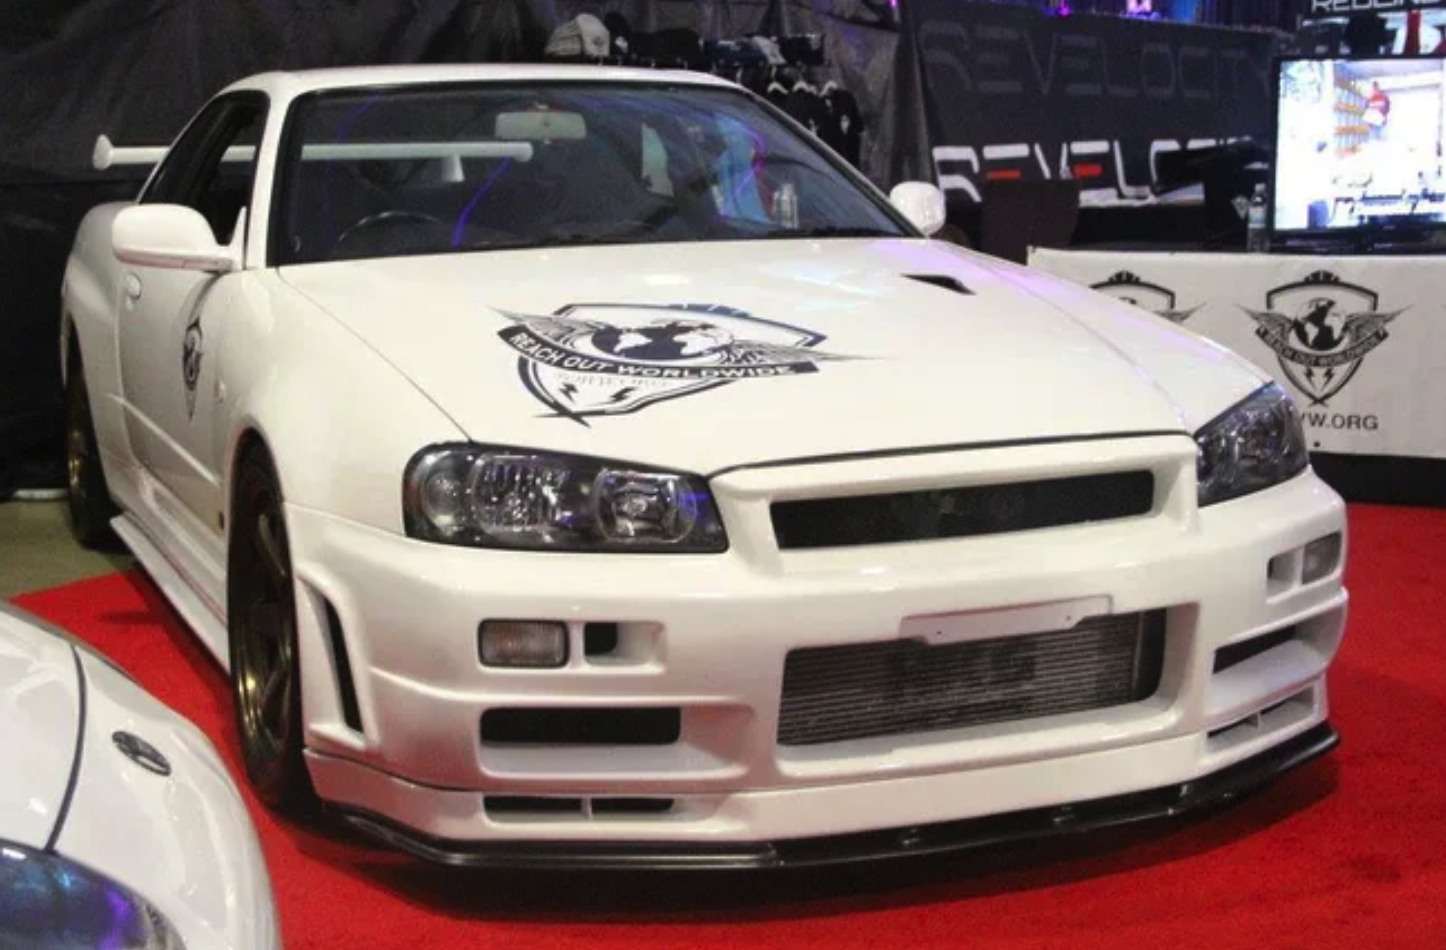 the legendary r34 nissan skyline is now legal in america